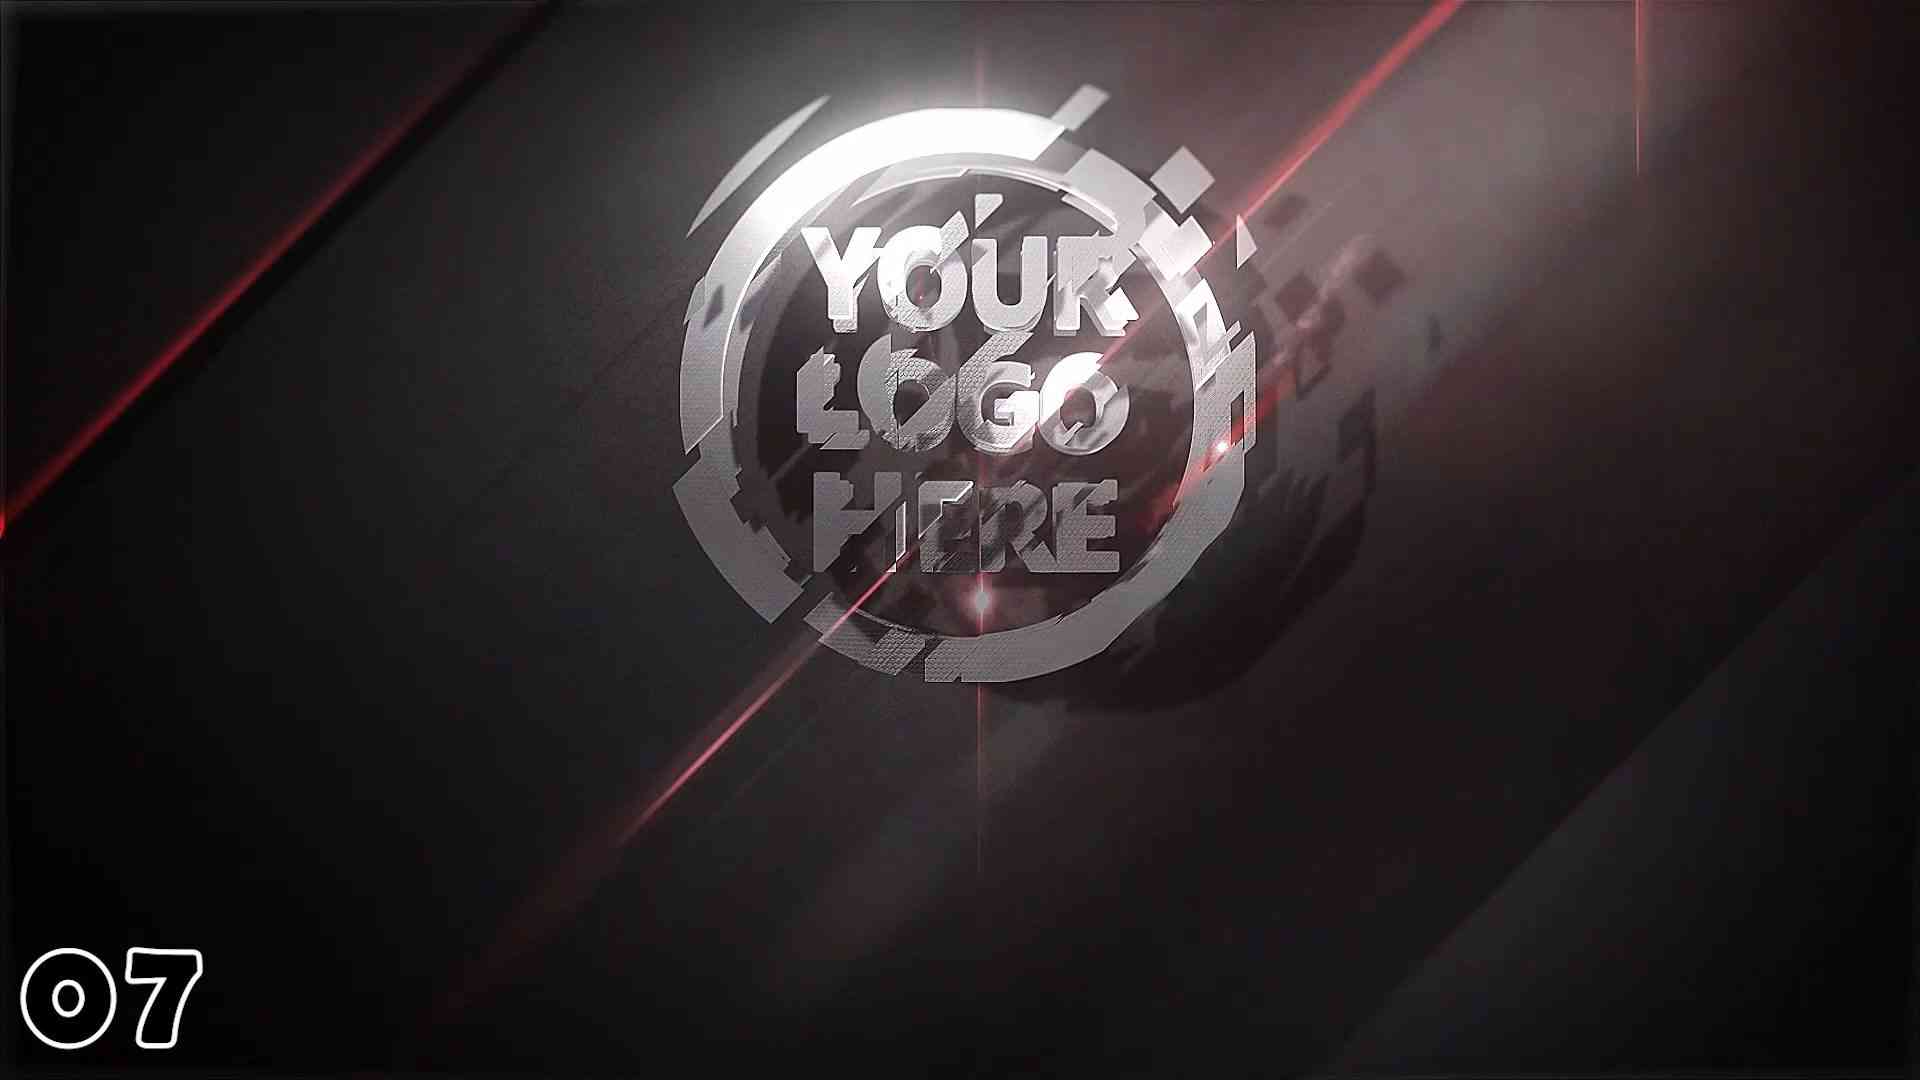 adobe after effects logo intro templates free